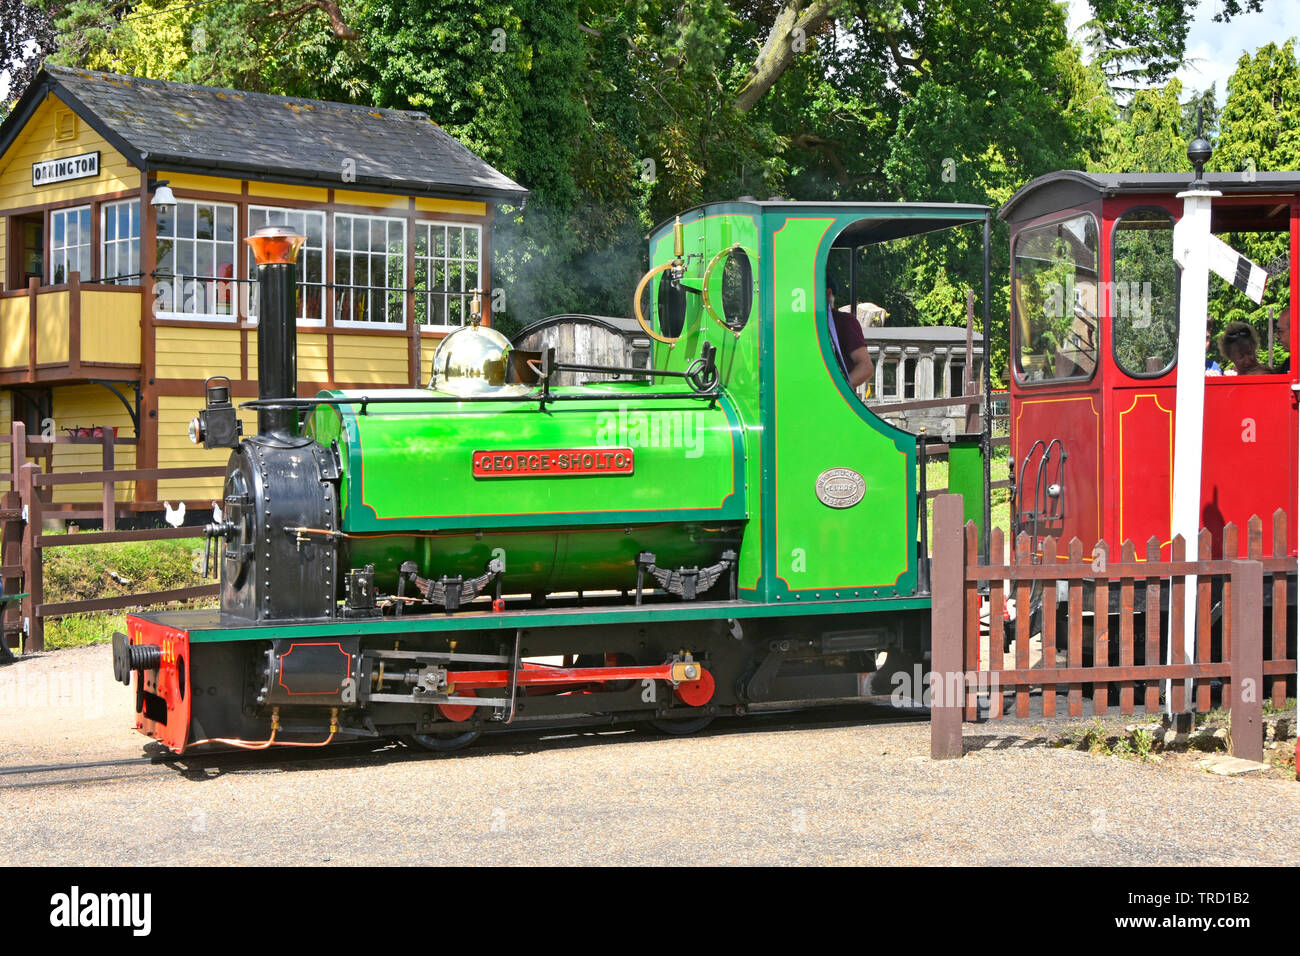 Bressingham gardens  steam engine  locomotive George Sholto number 994 & train passing signal box transporting visitors around gardens East Anglia UK Stock Photo